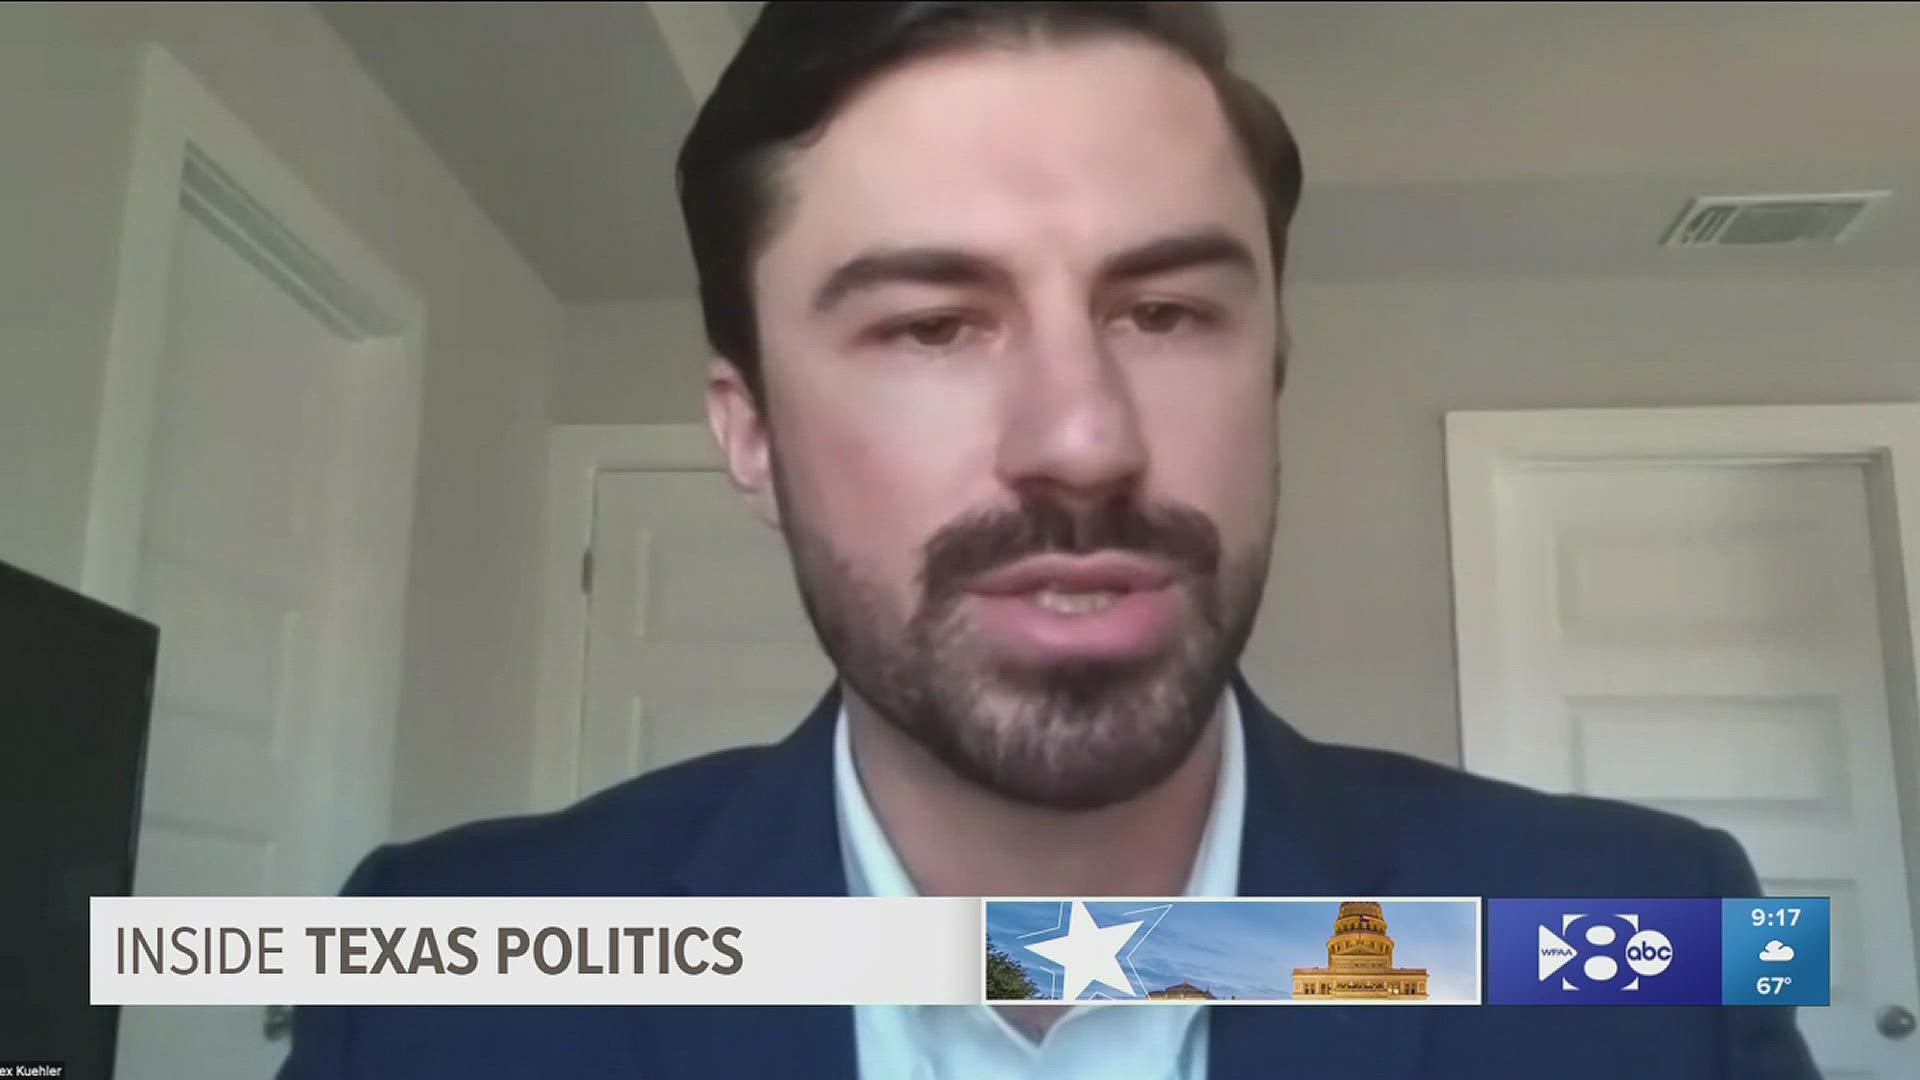 Inside Texas Politics spoke to Alex Keeler, from the RNC, about the purpose behind them.